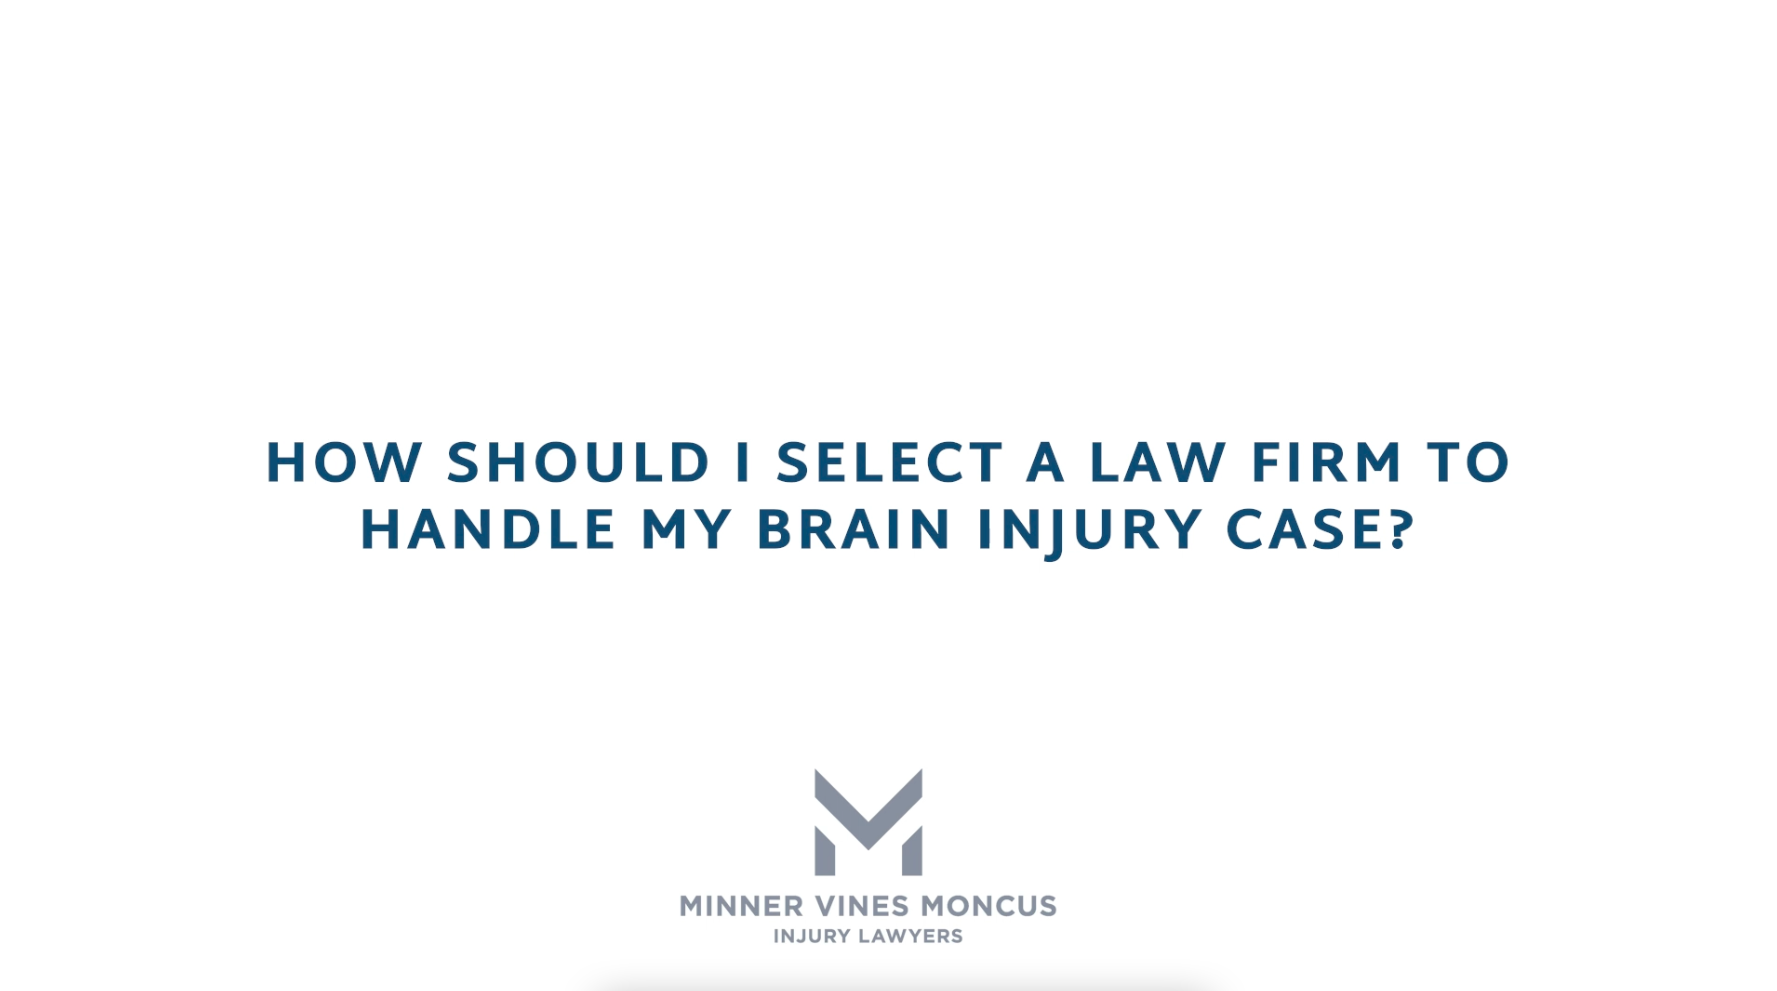 How should I select a law firm to handle my brain injury case?